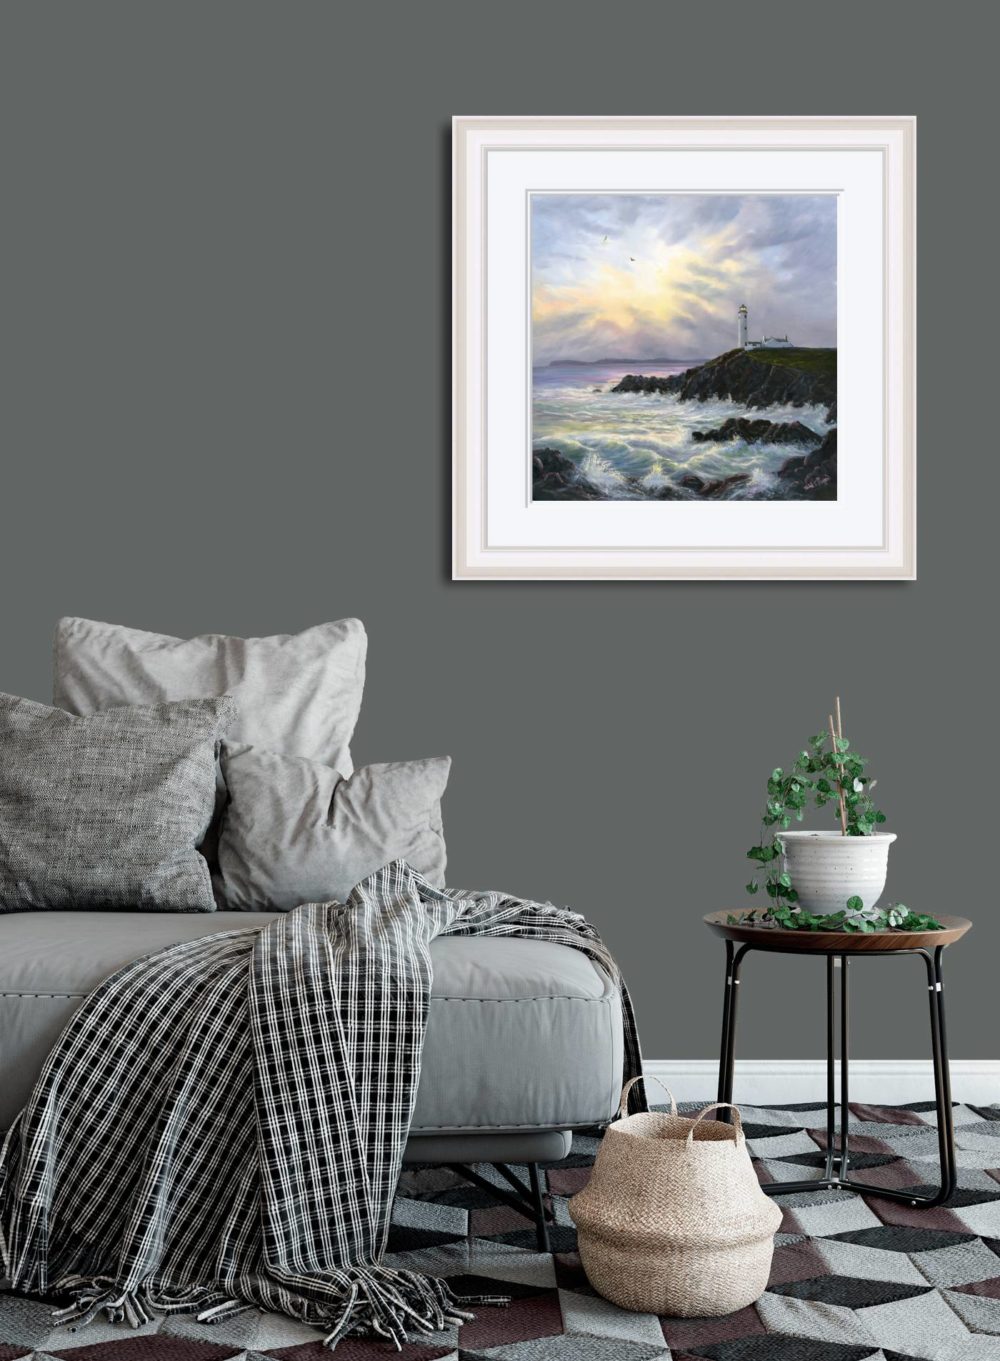 Fanad Lighthouse Print (Large) In White Frame In Room